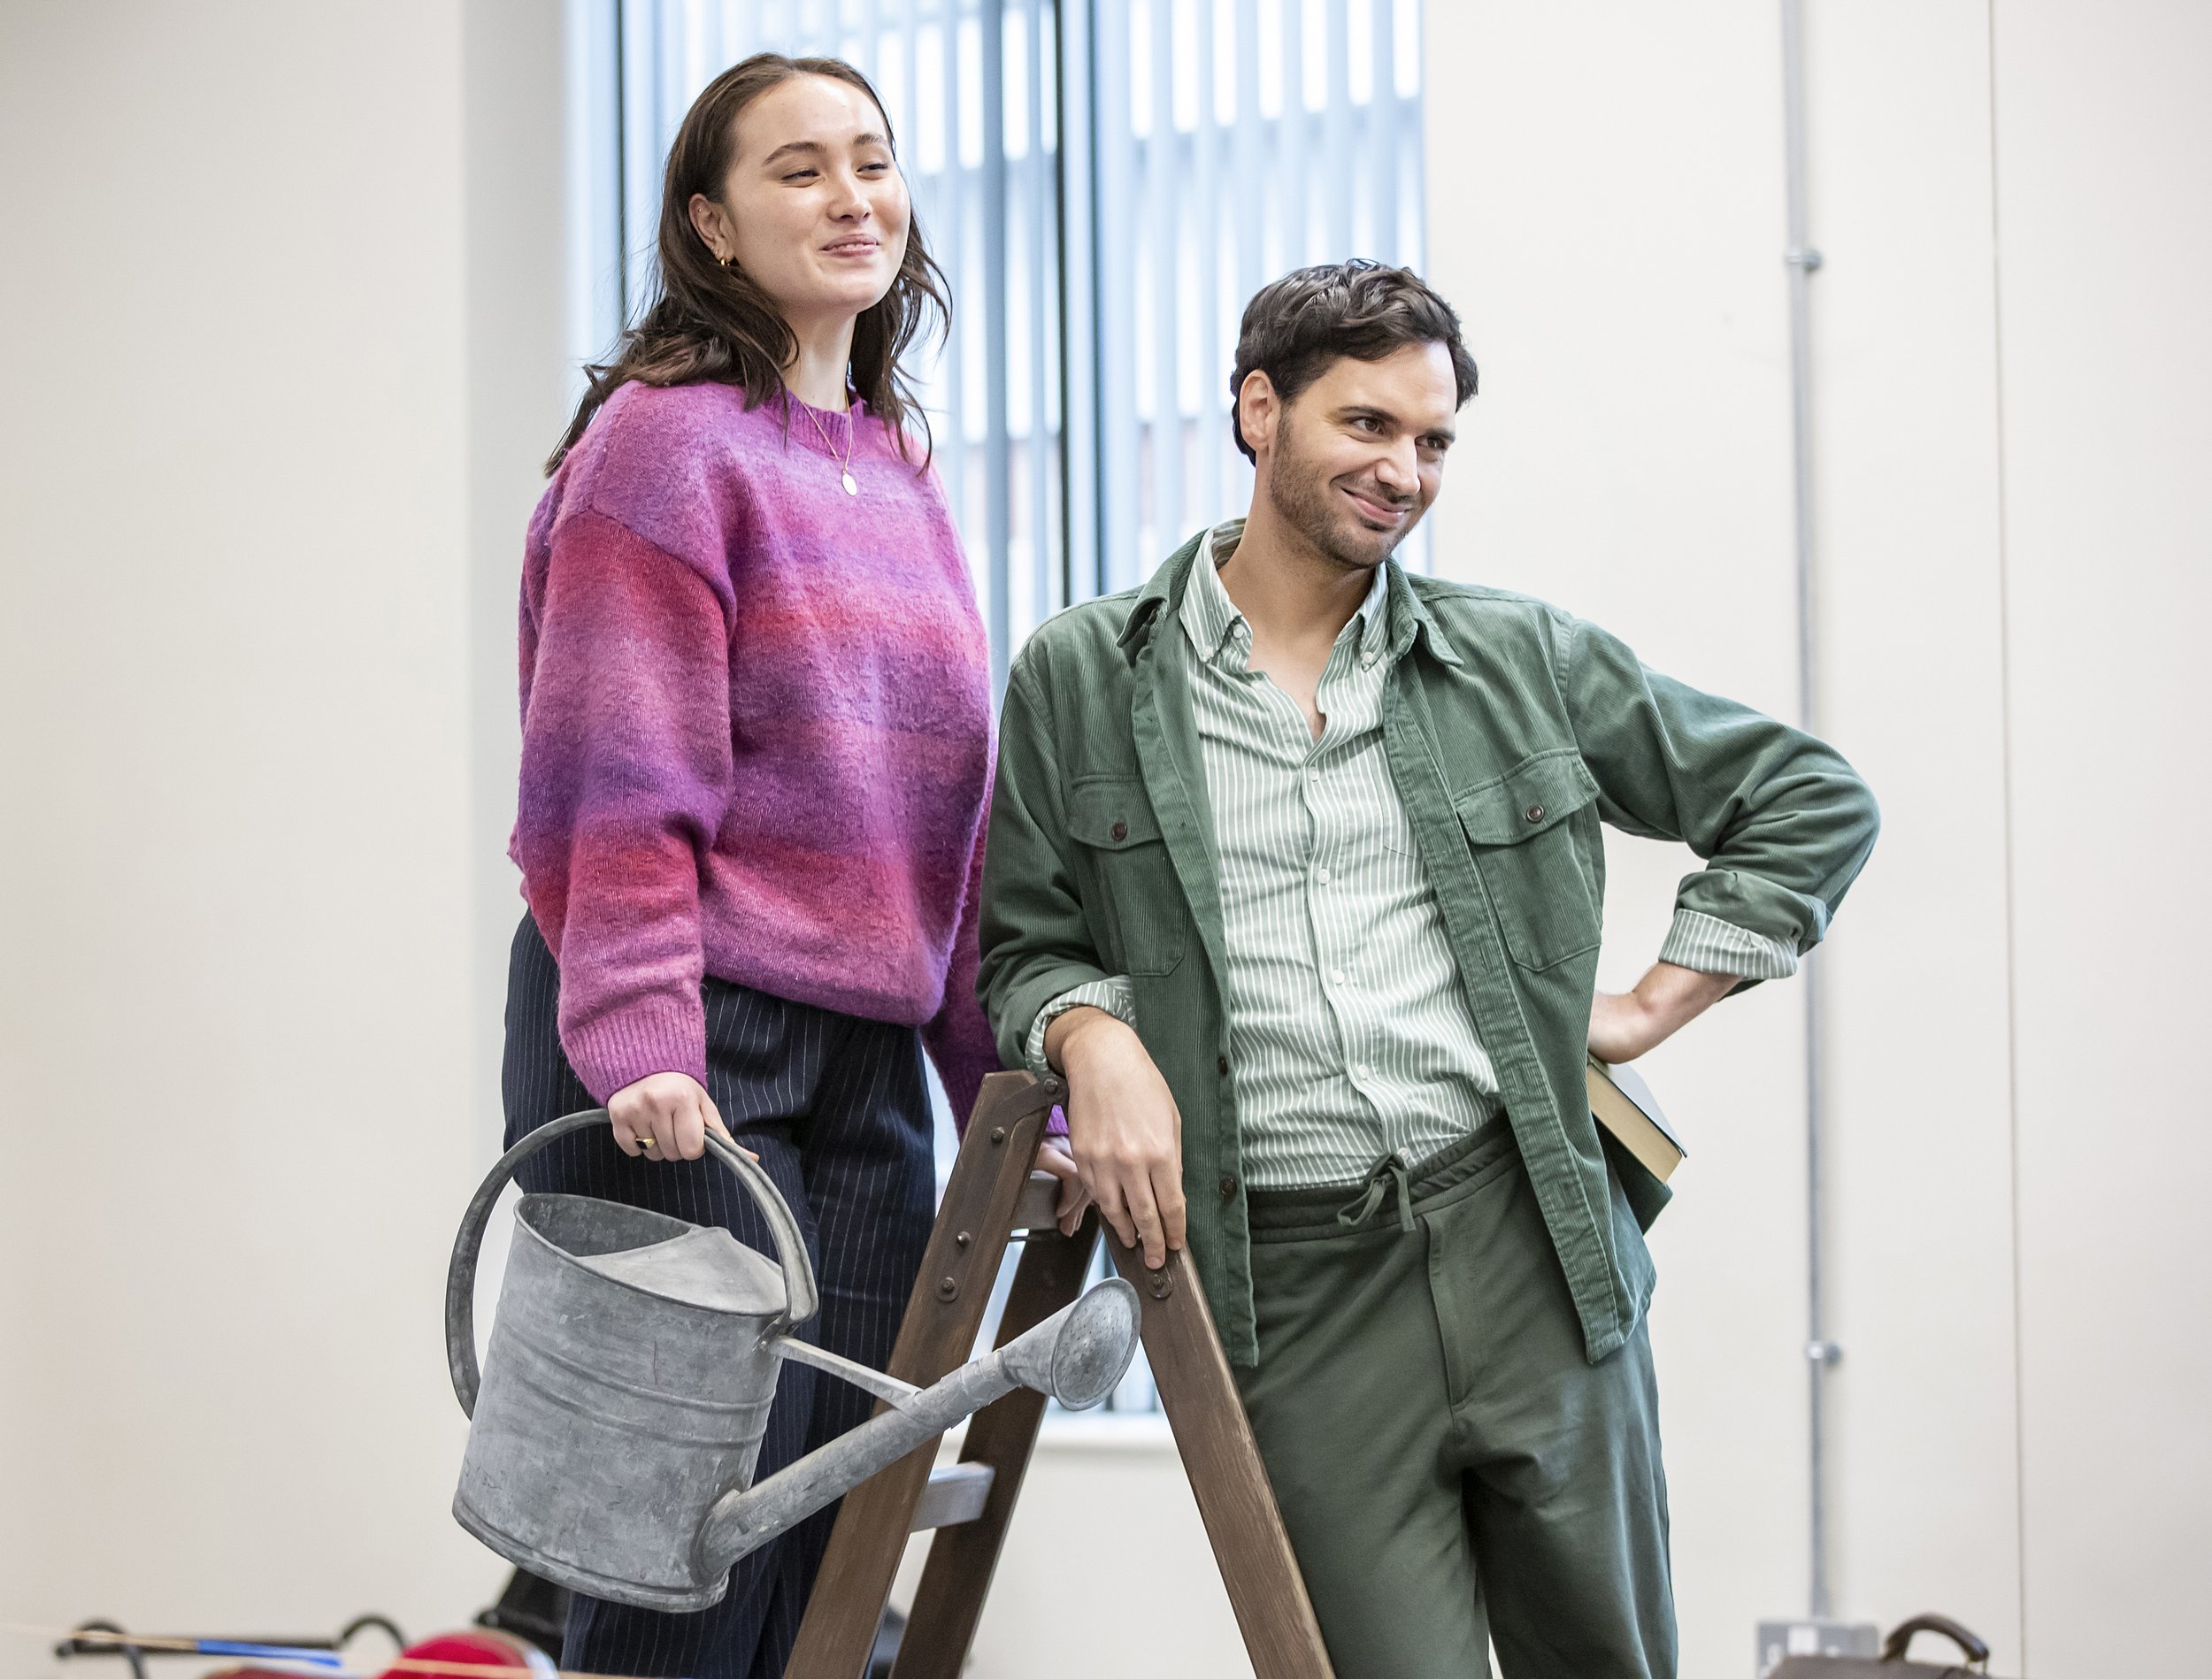 015_The Importance of Being Earnest Rehearsals_Pamela Raith Photography.jpg